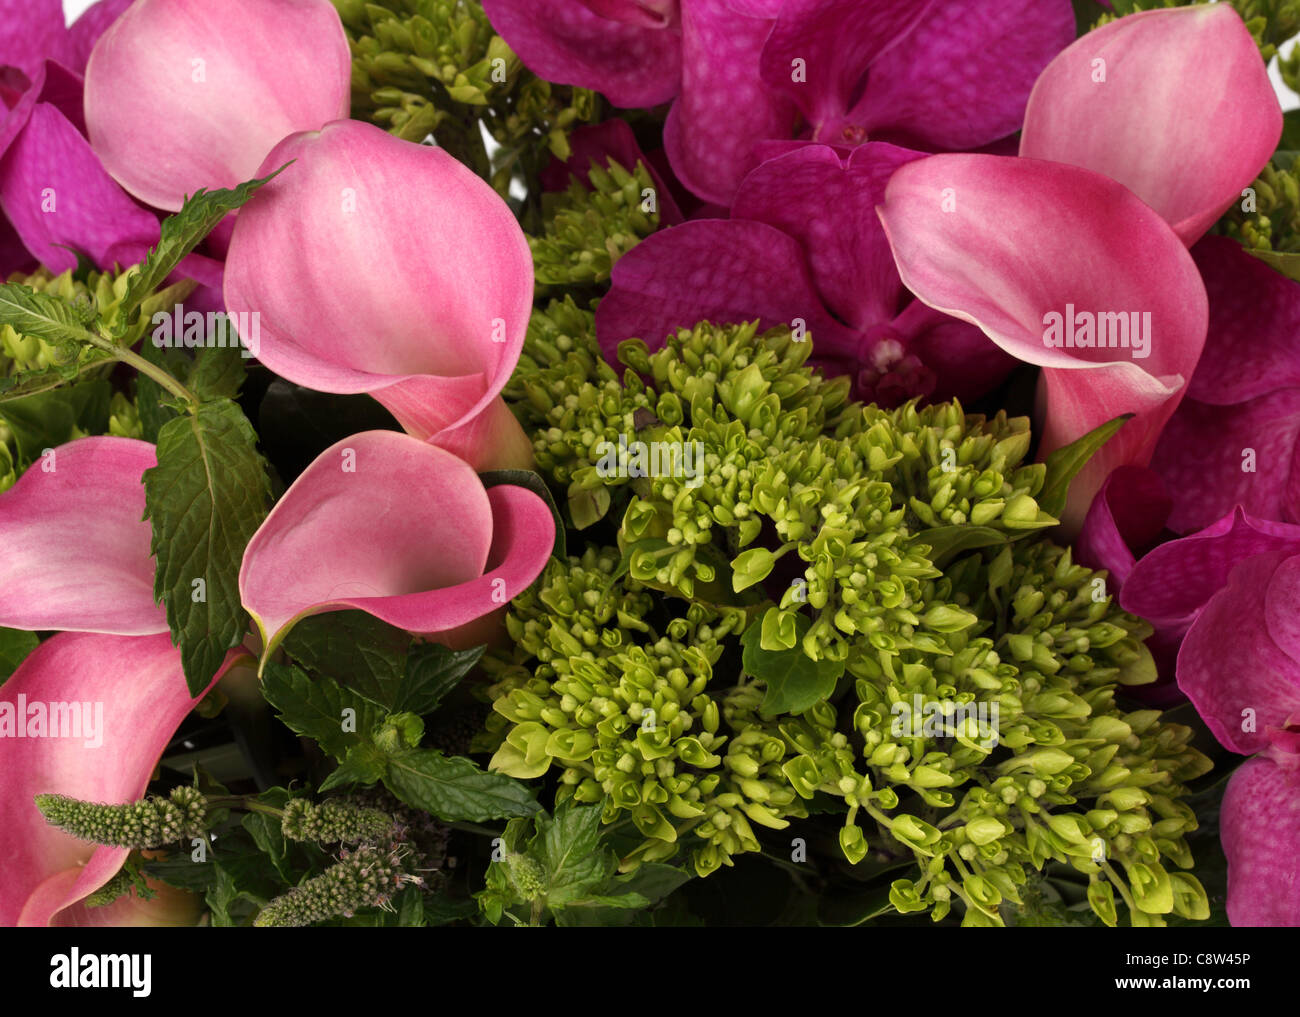 A close-up of a colorful bouquet of flowers. Pink calla lilies, purple vanda orchids, green unknown spray. Stock Photo